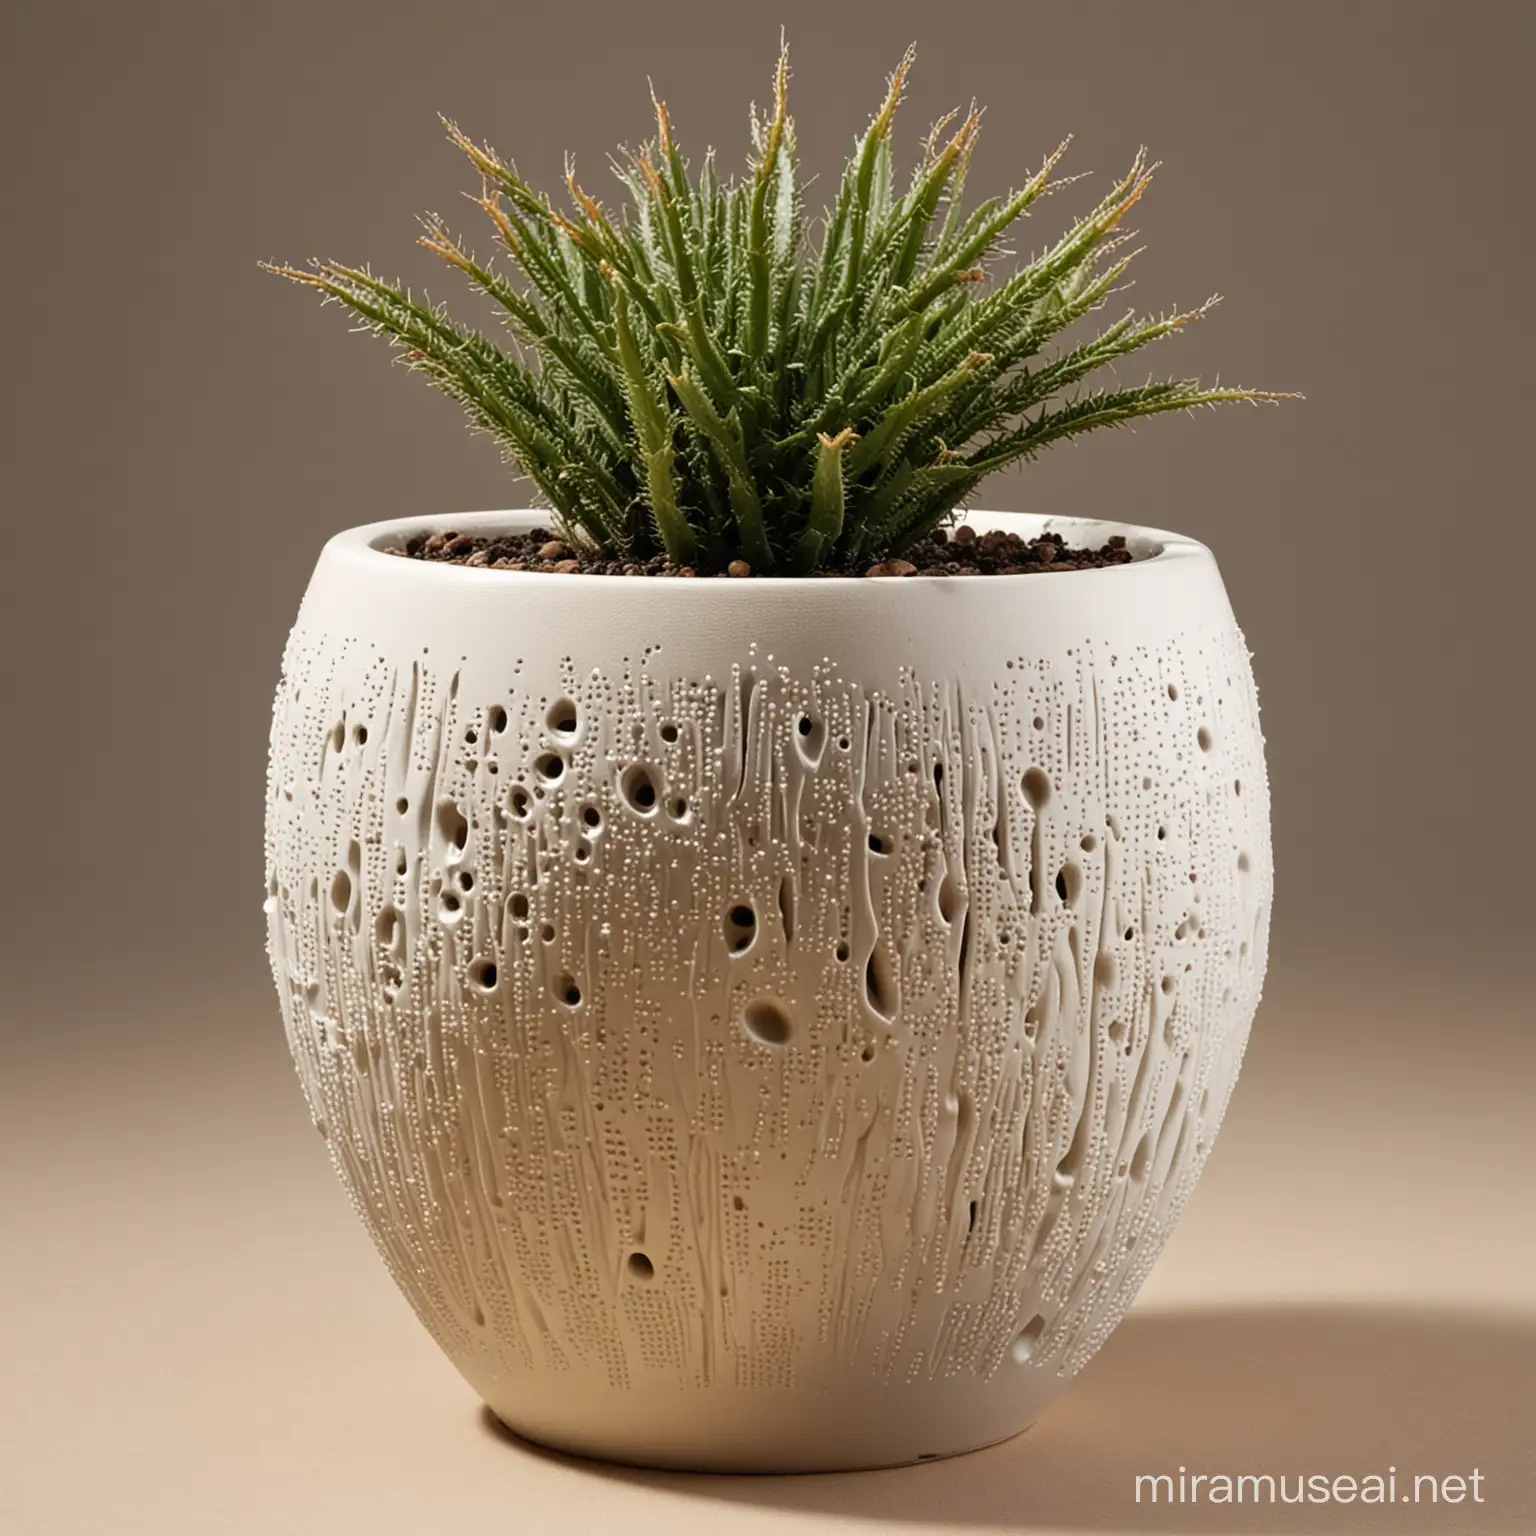 Biomimetic Plant Pot with Desert BeetleInspired Water Collection System